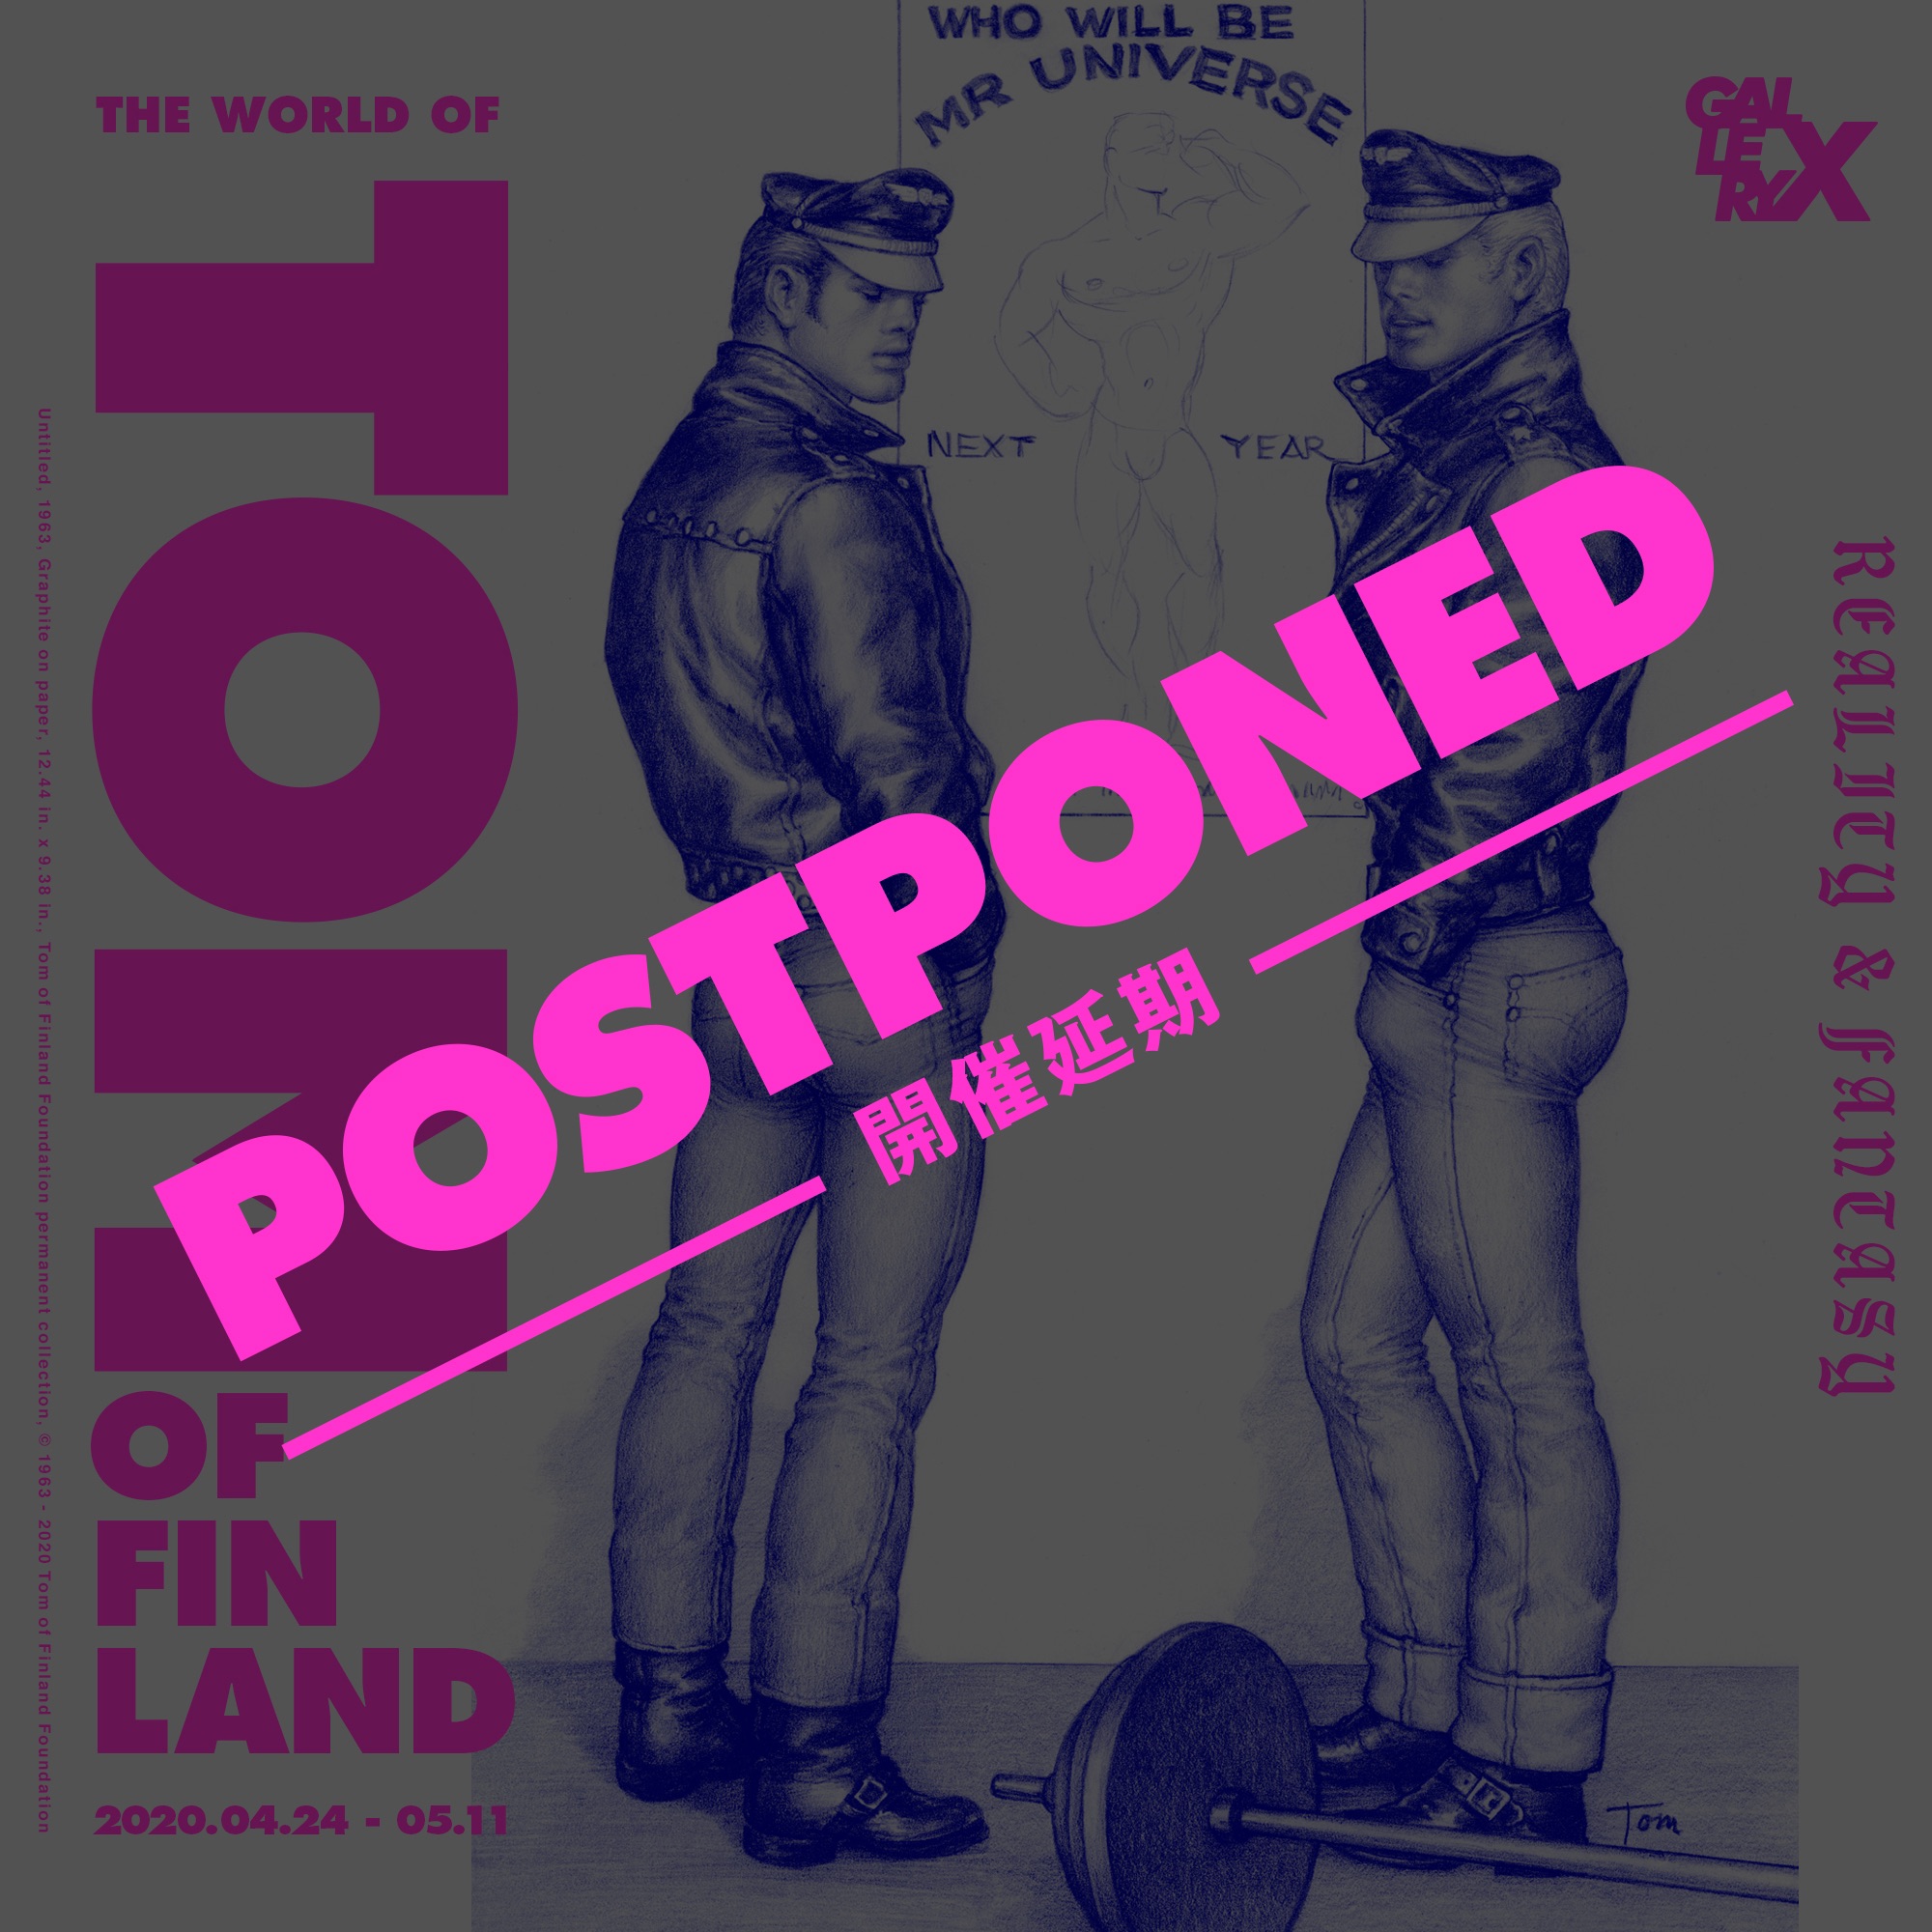 Tom of Finland Exhibition